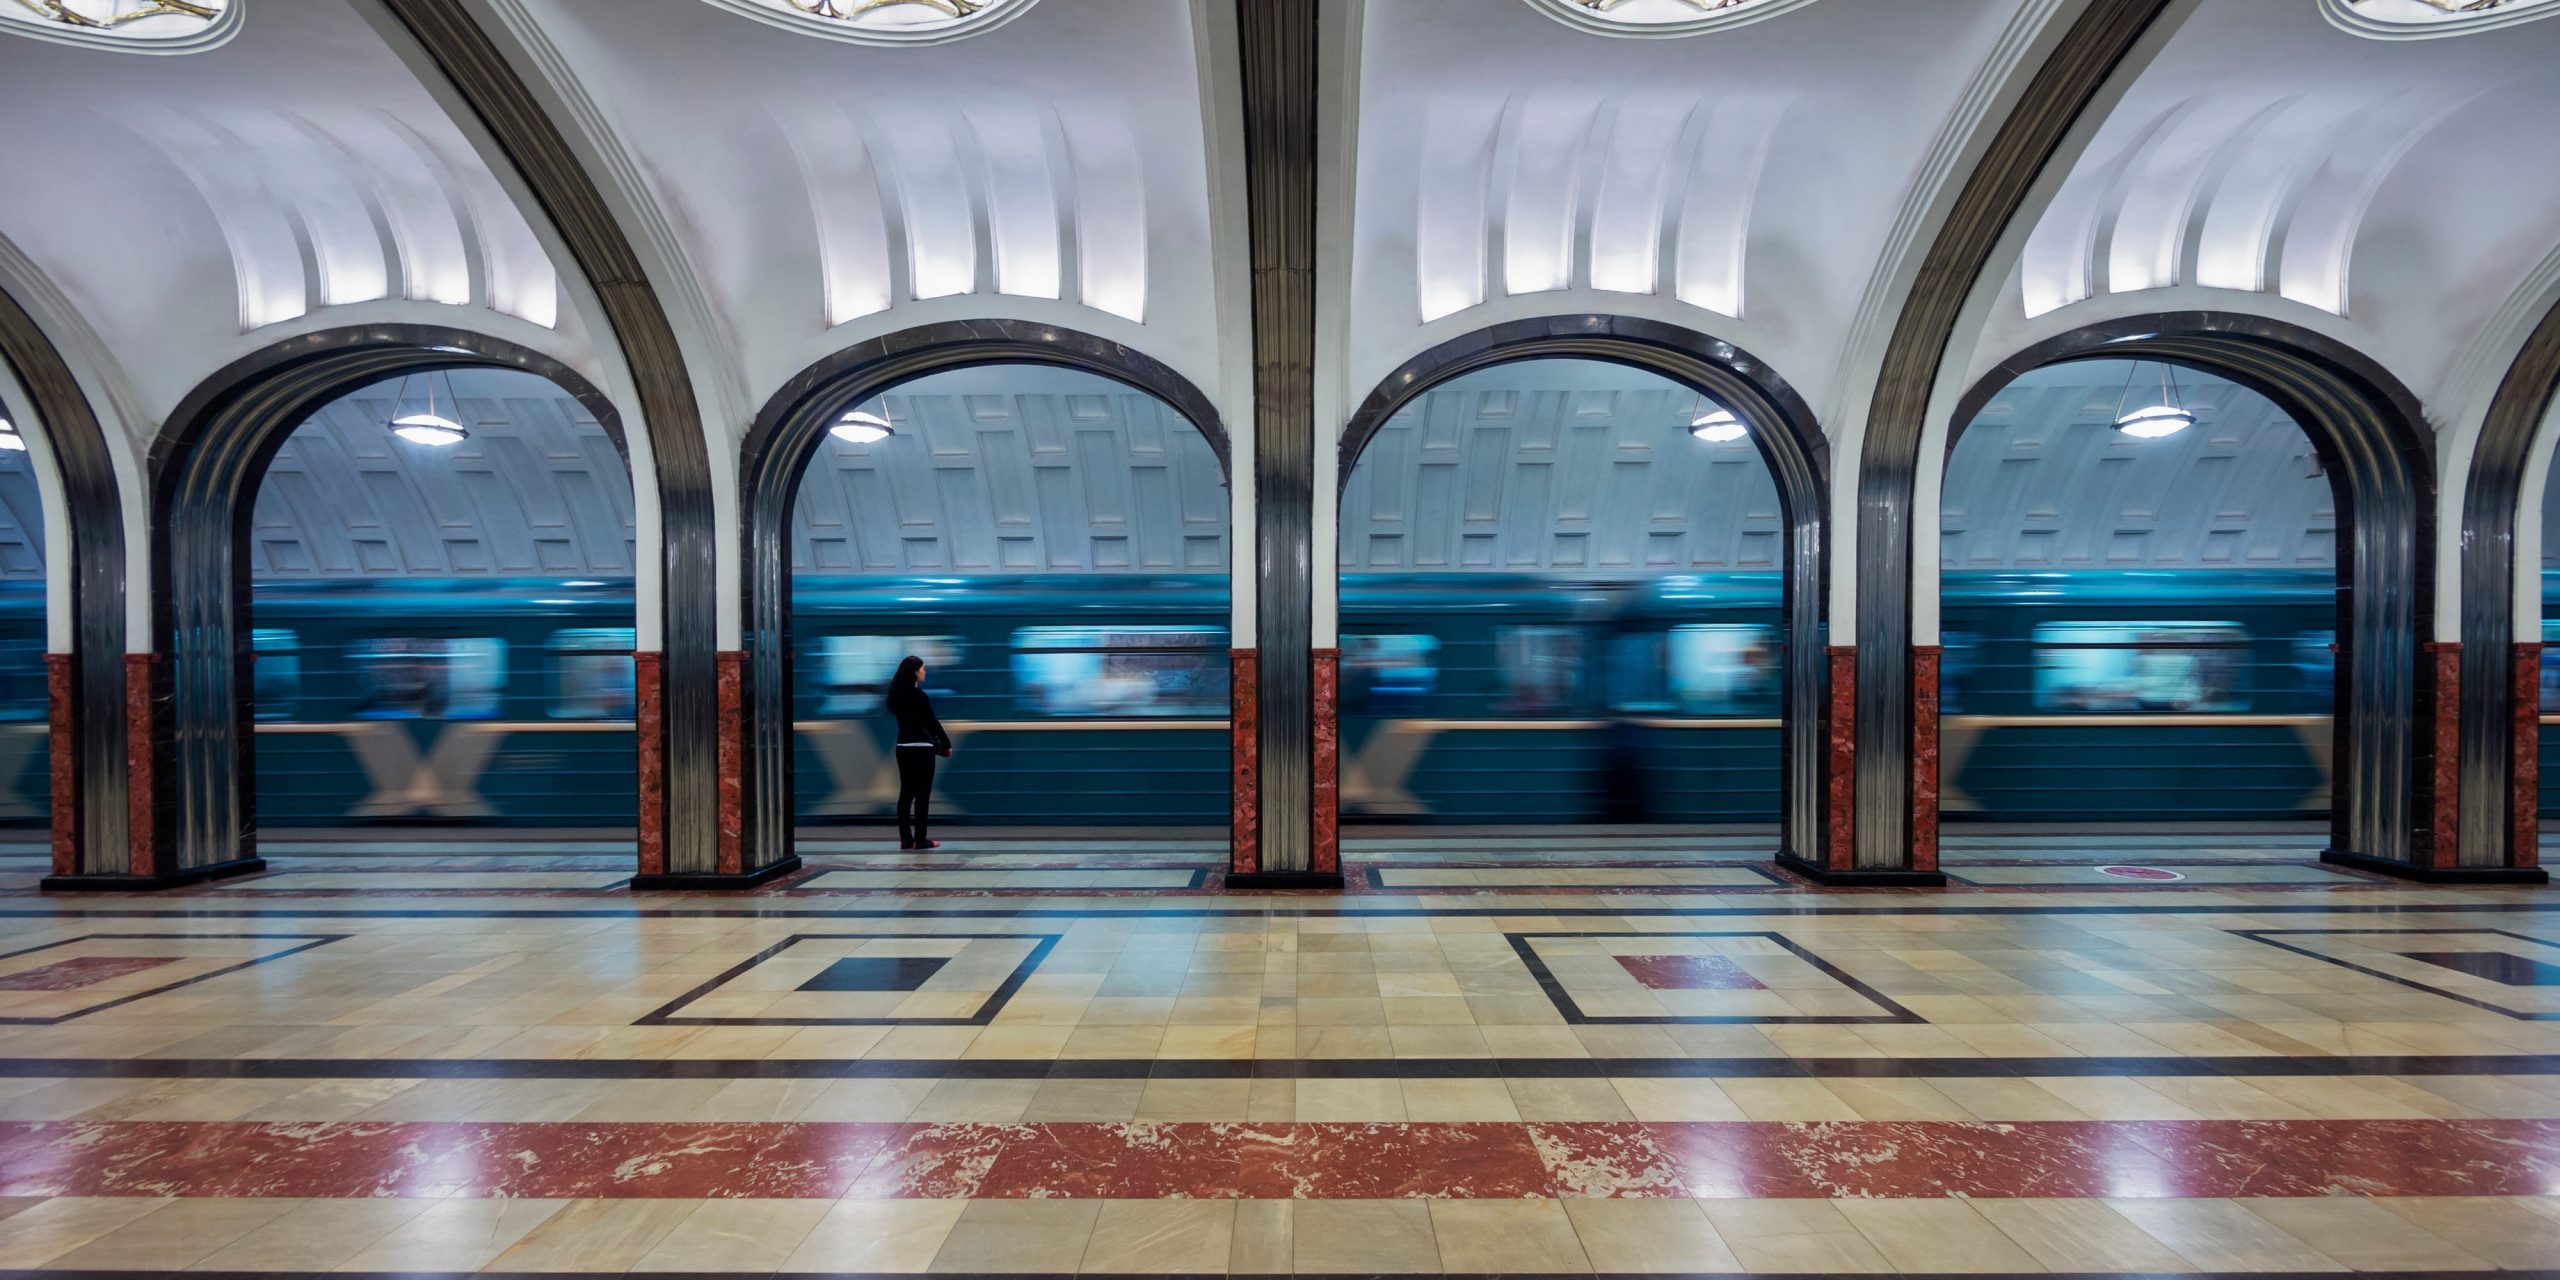 A subway train is seen moving through Mayakovskaya station in Moscow, Russia.